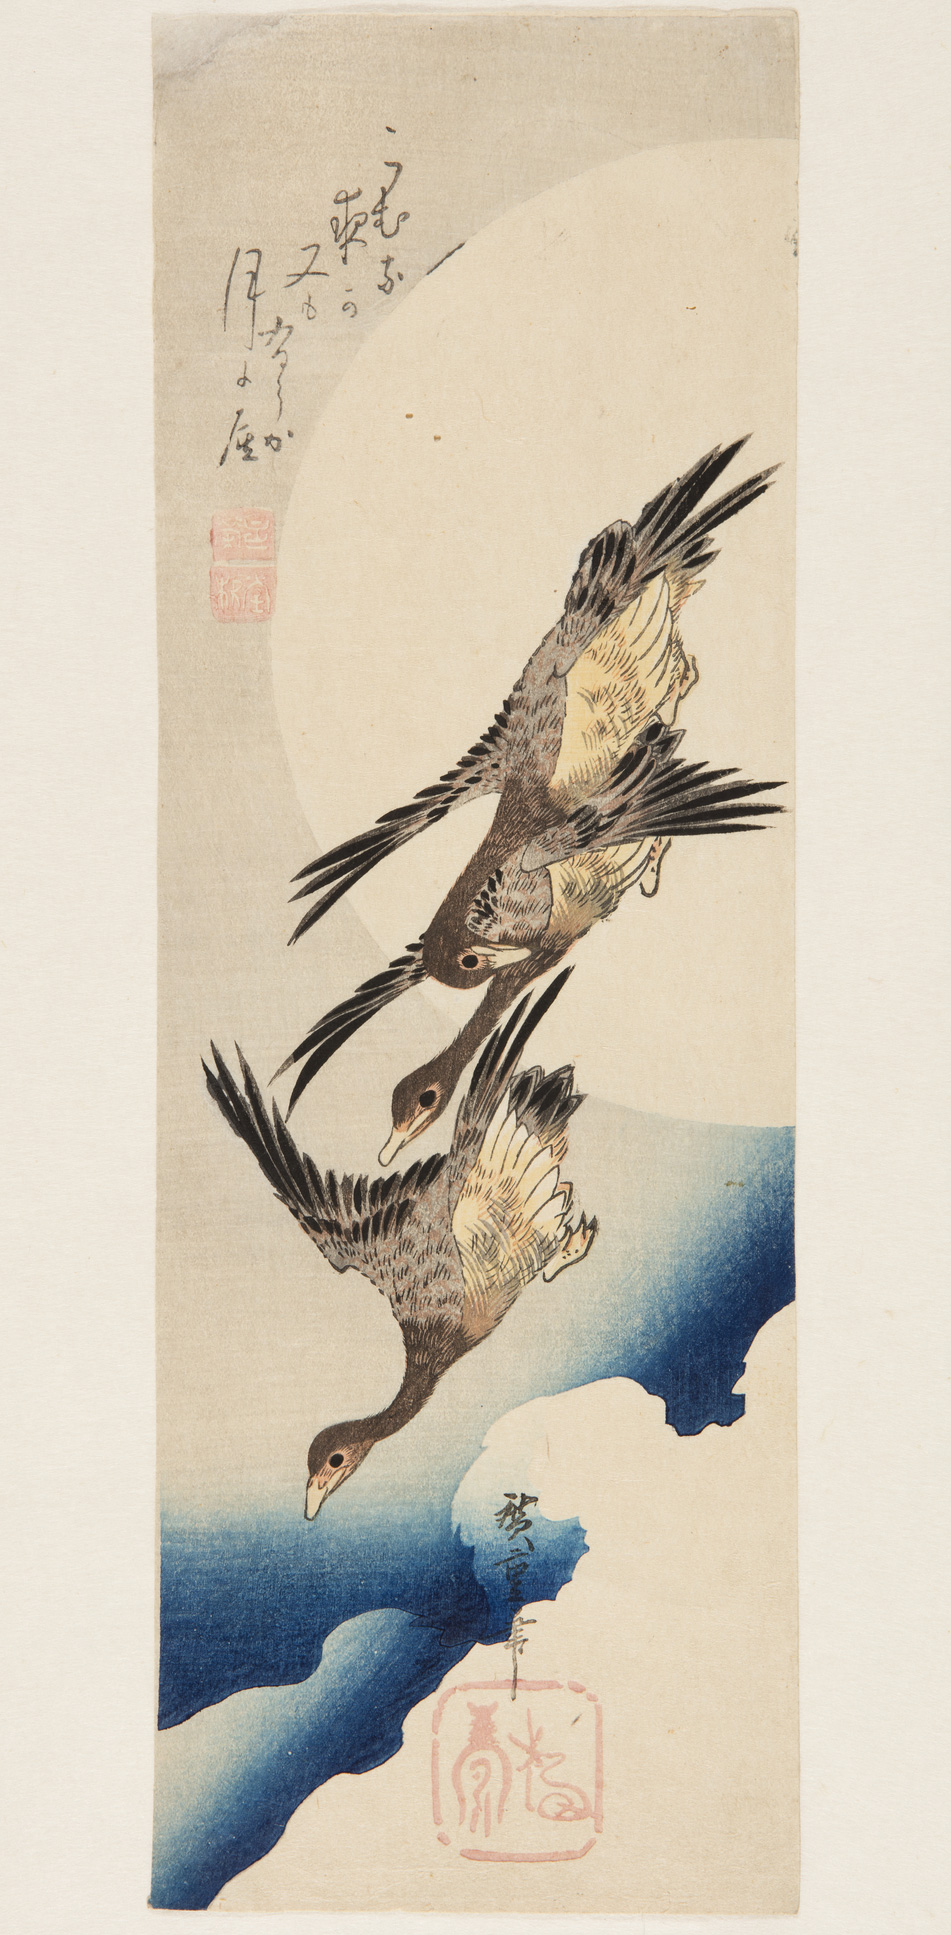 Japanese print of three geese flying, swooping down, a full moon is in the background.